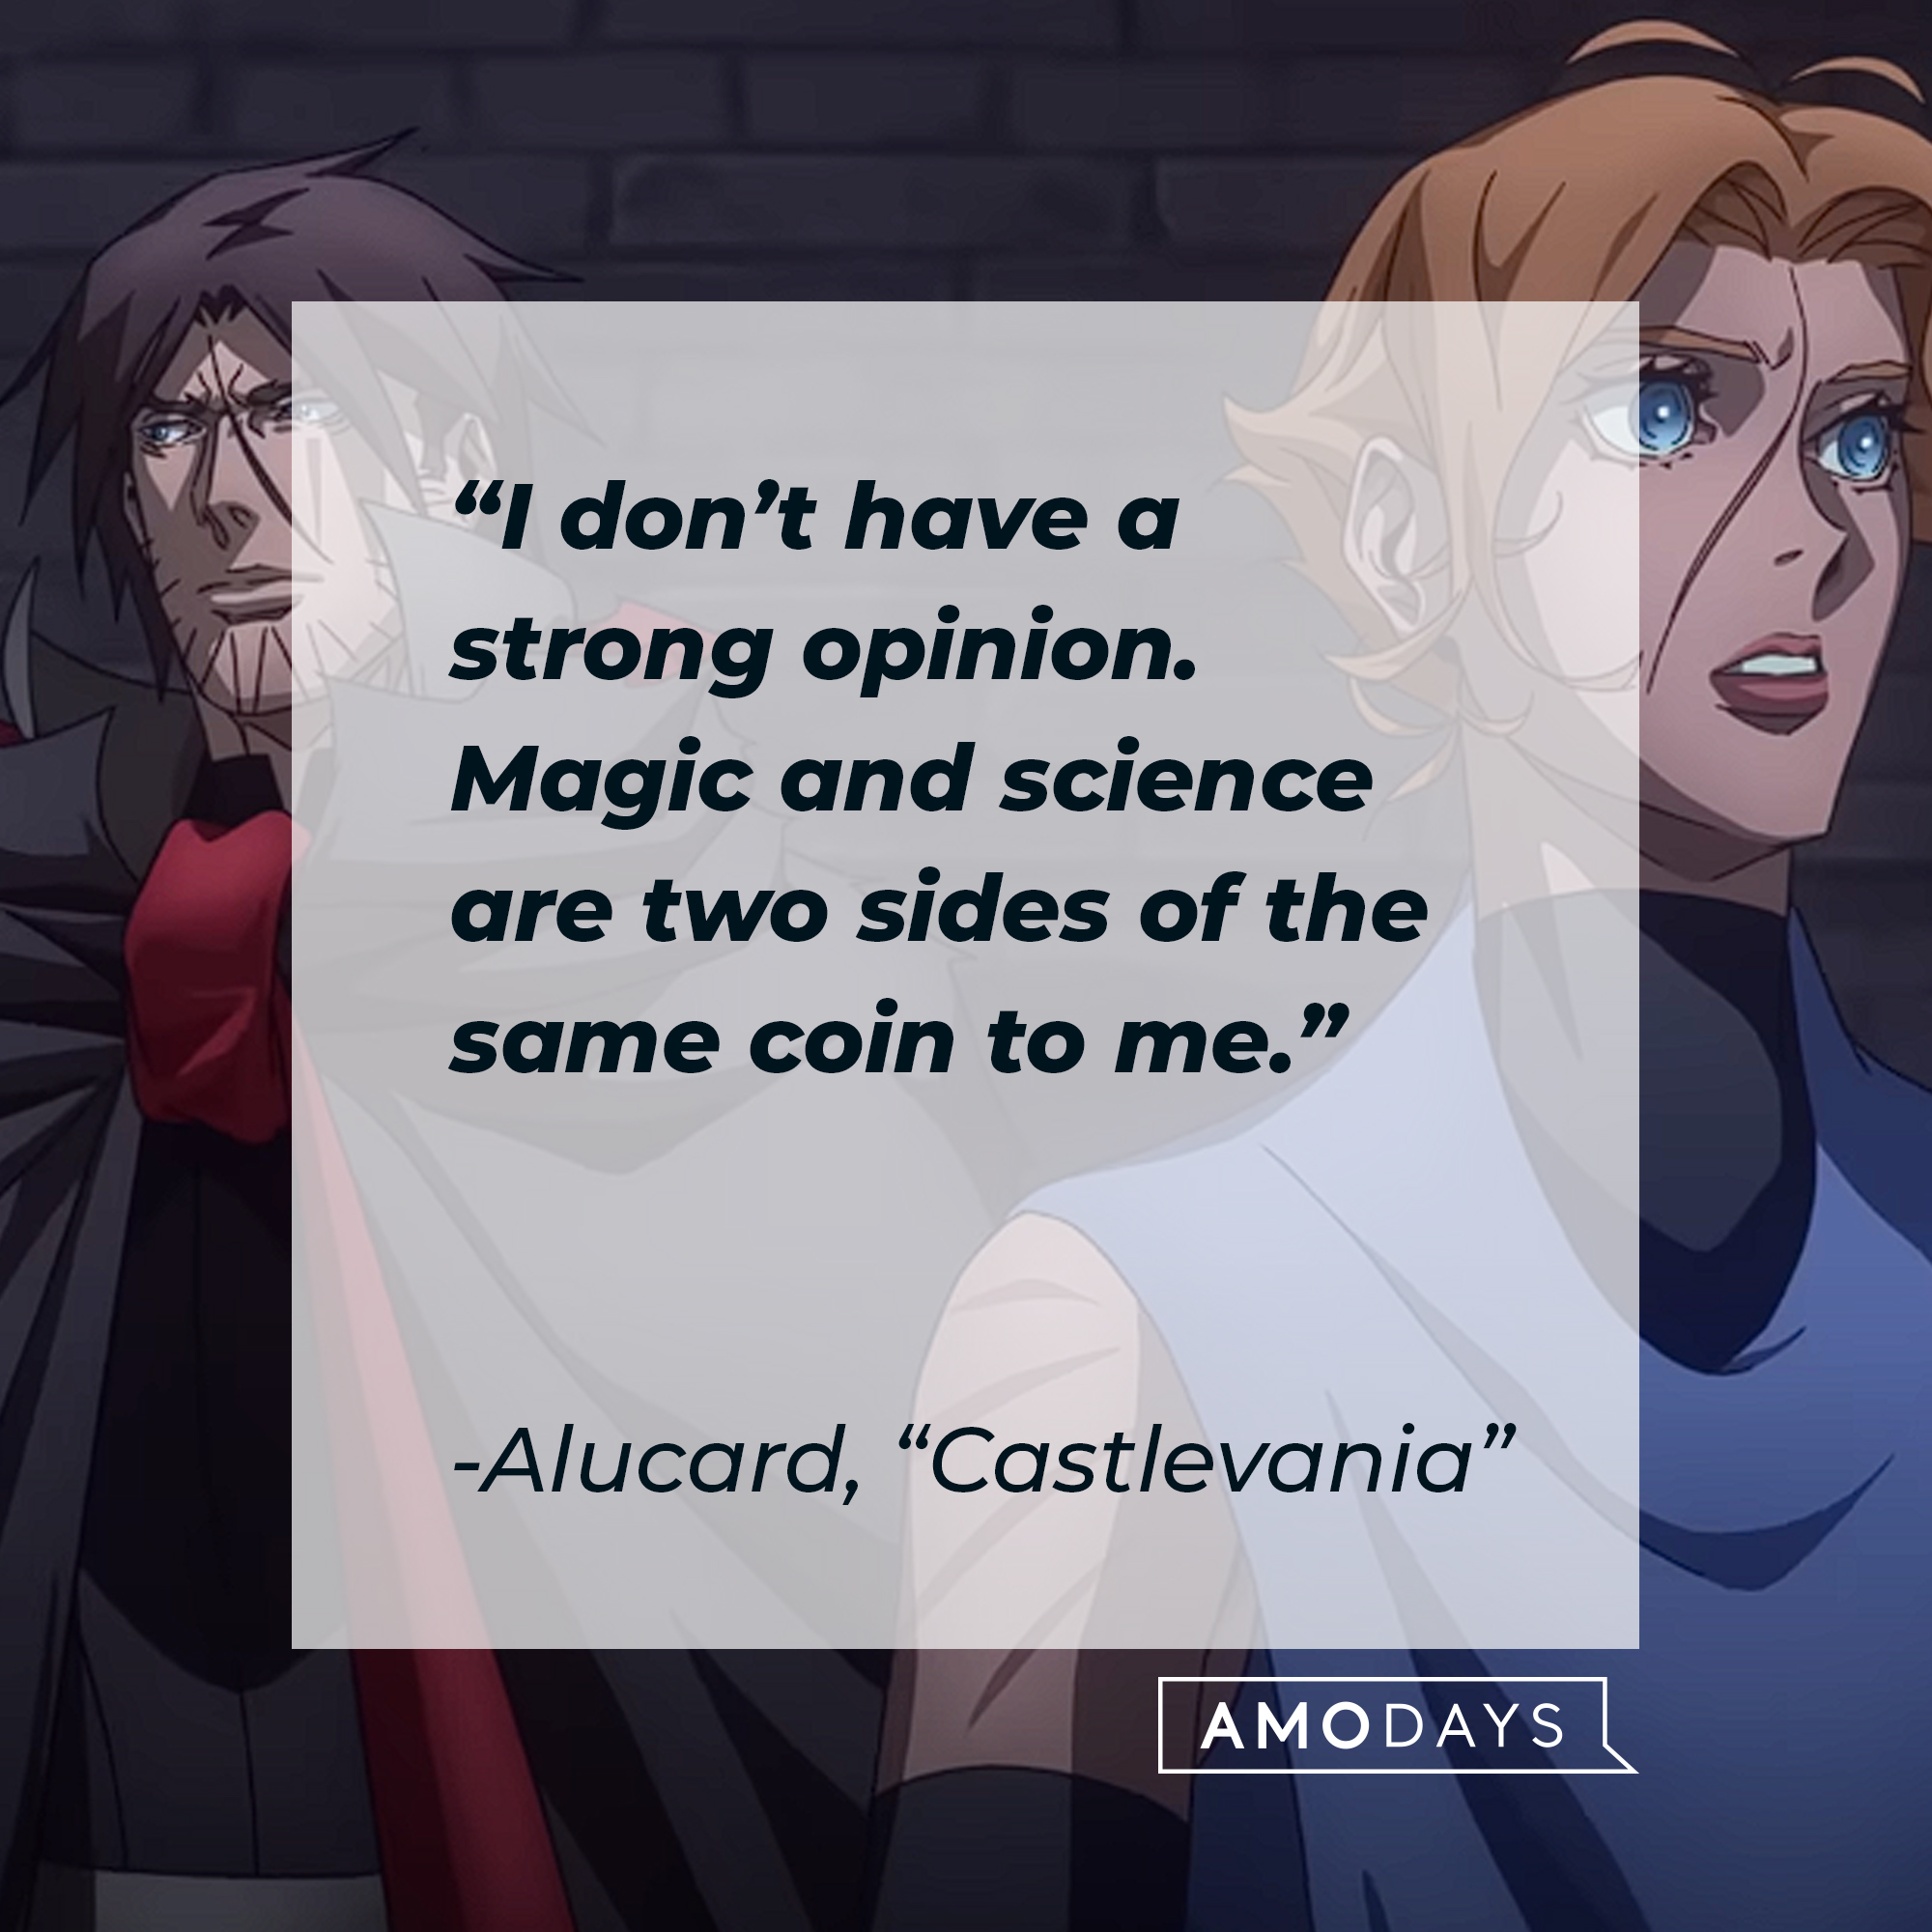 Alucard's quote from "Castlevania:" “I don’t have a strong opinion. Magic and science are two sides of the same coin to me.” | Source: Youtube.com/Netflix